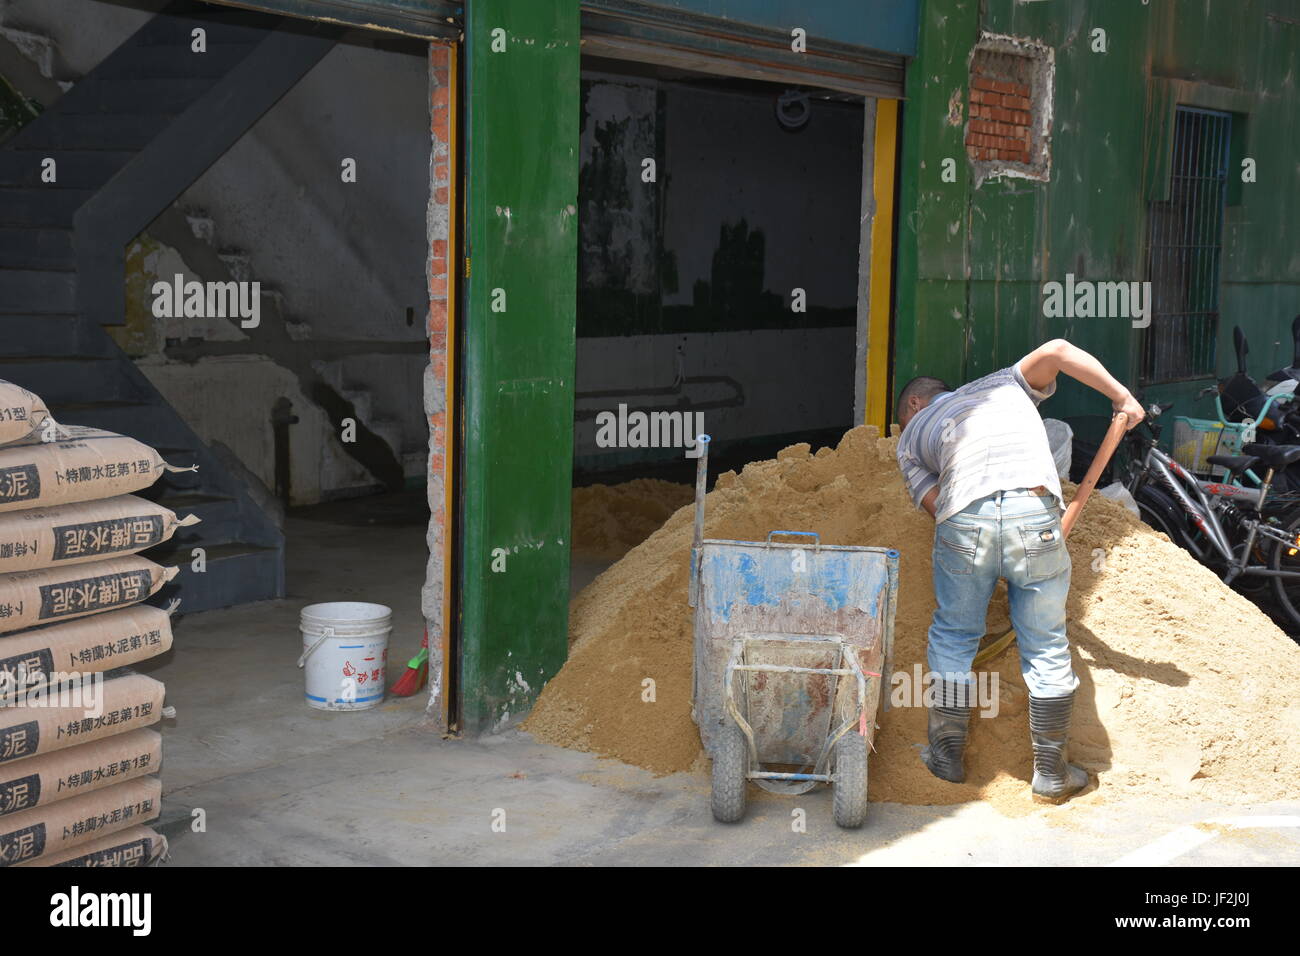 Man digging up sand to mix into cement to repair an old building in Taiwan. This means the new renters payed to have it done before opening. Stock Photo